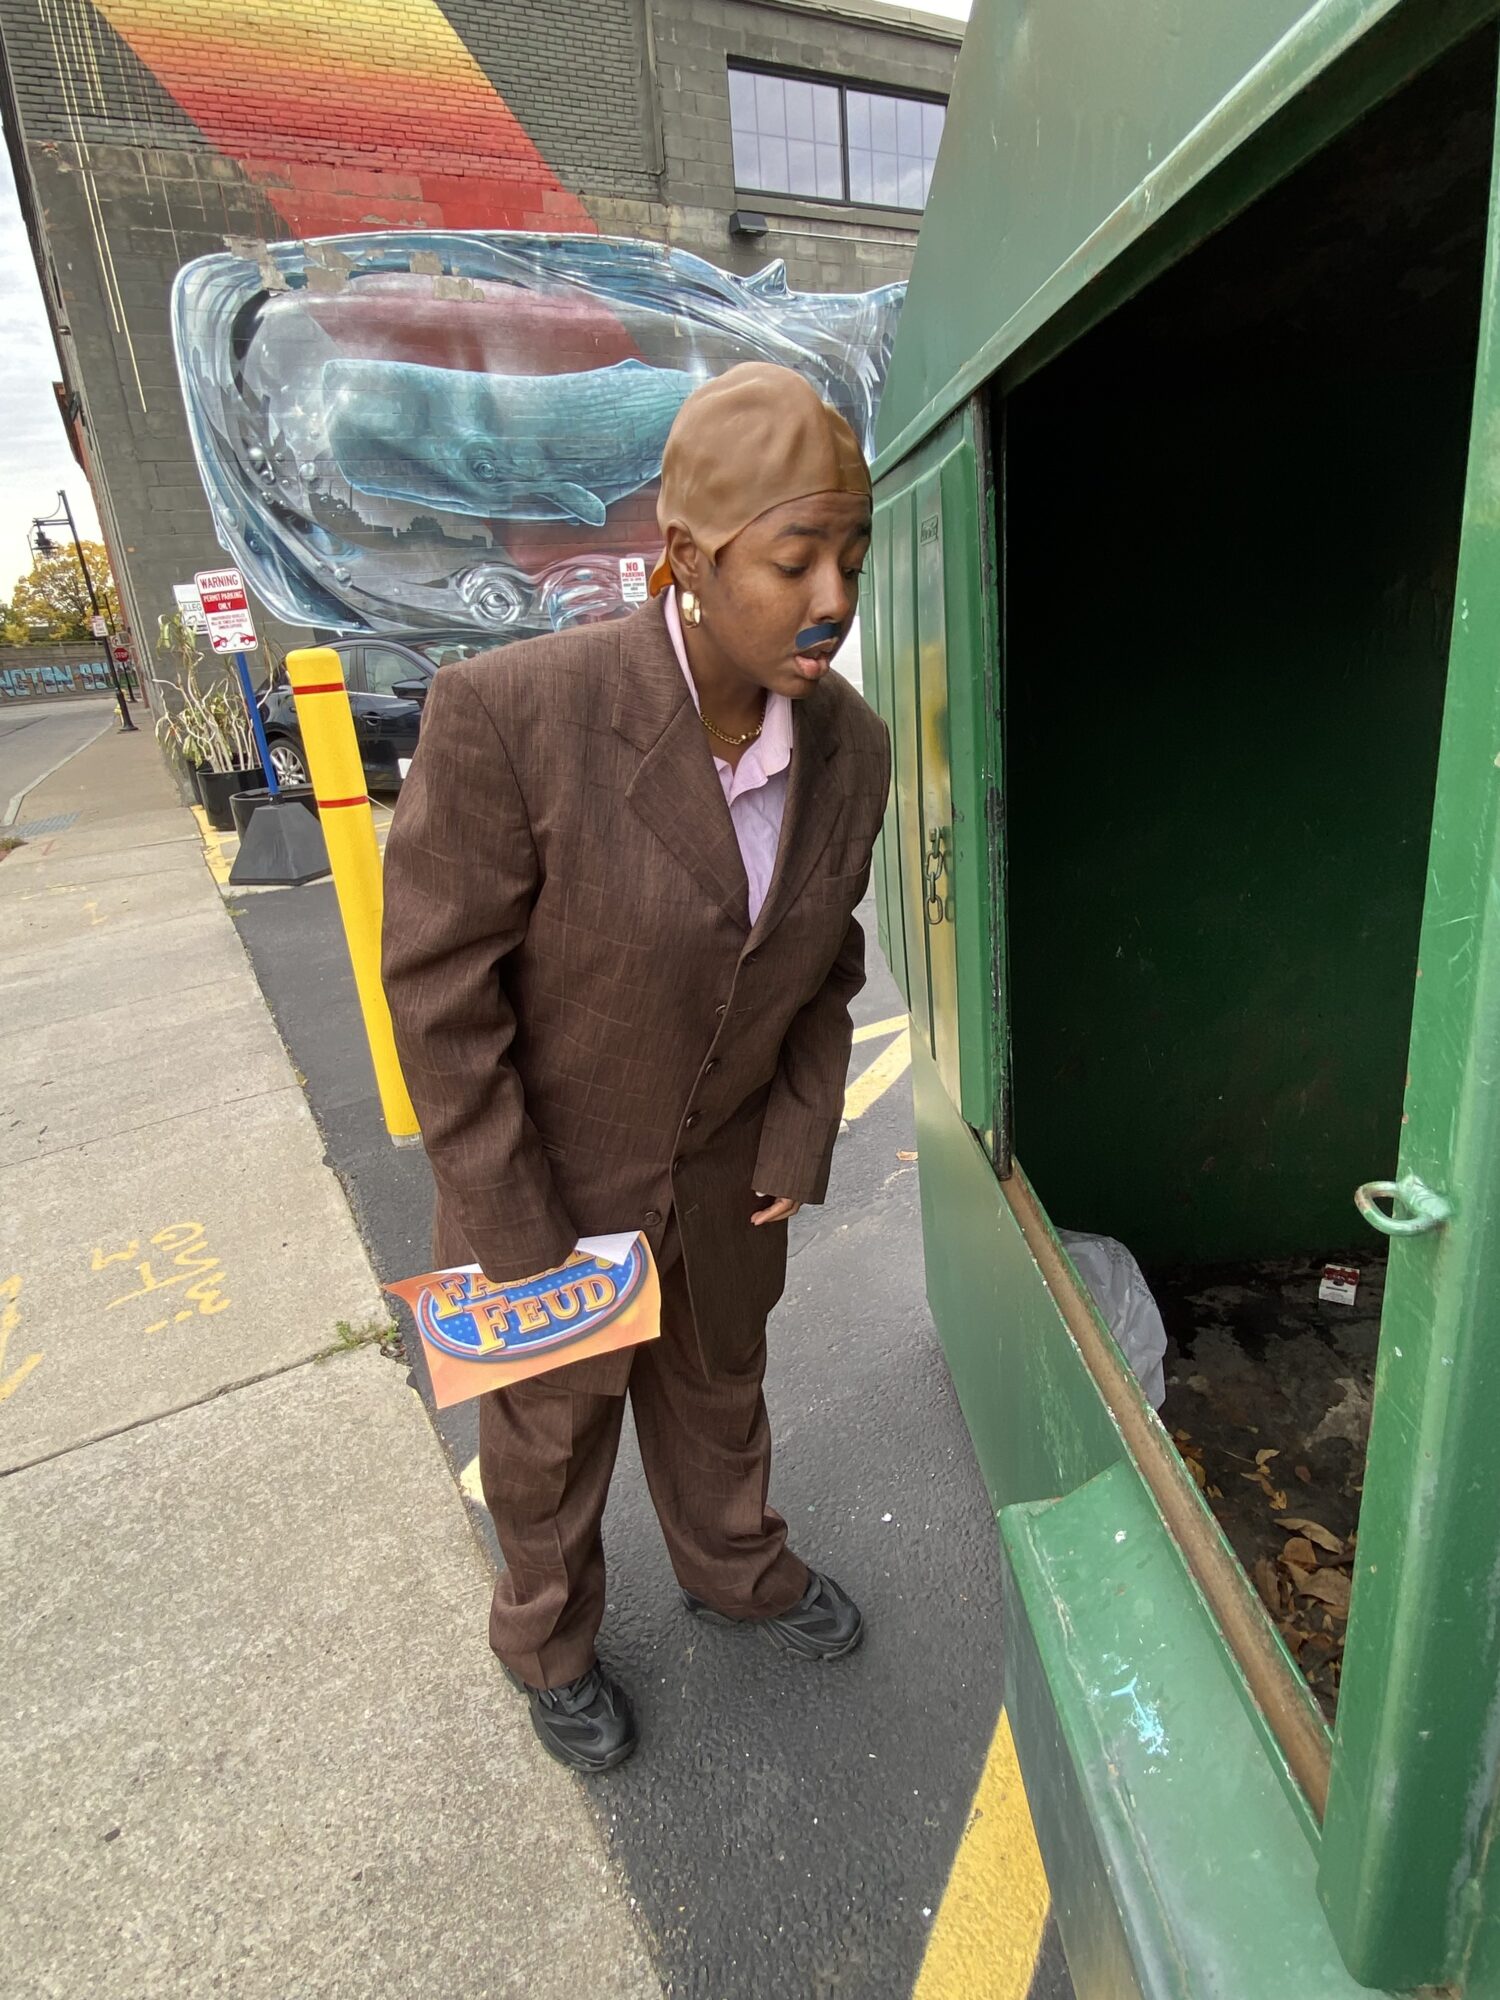 Raven as Steve Harvey blankly looks into a dumpster in a parking lot